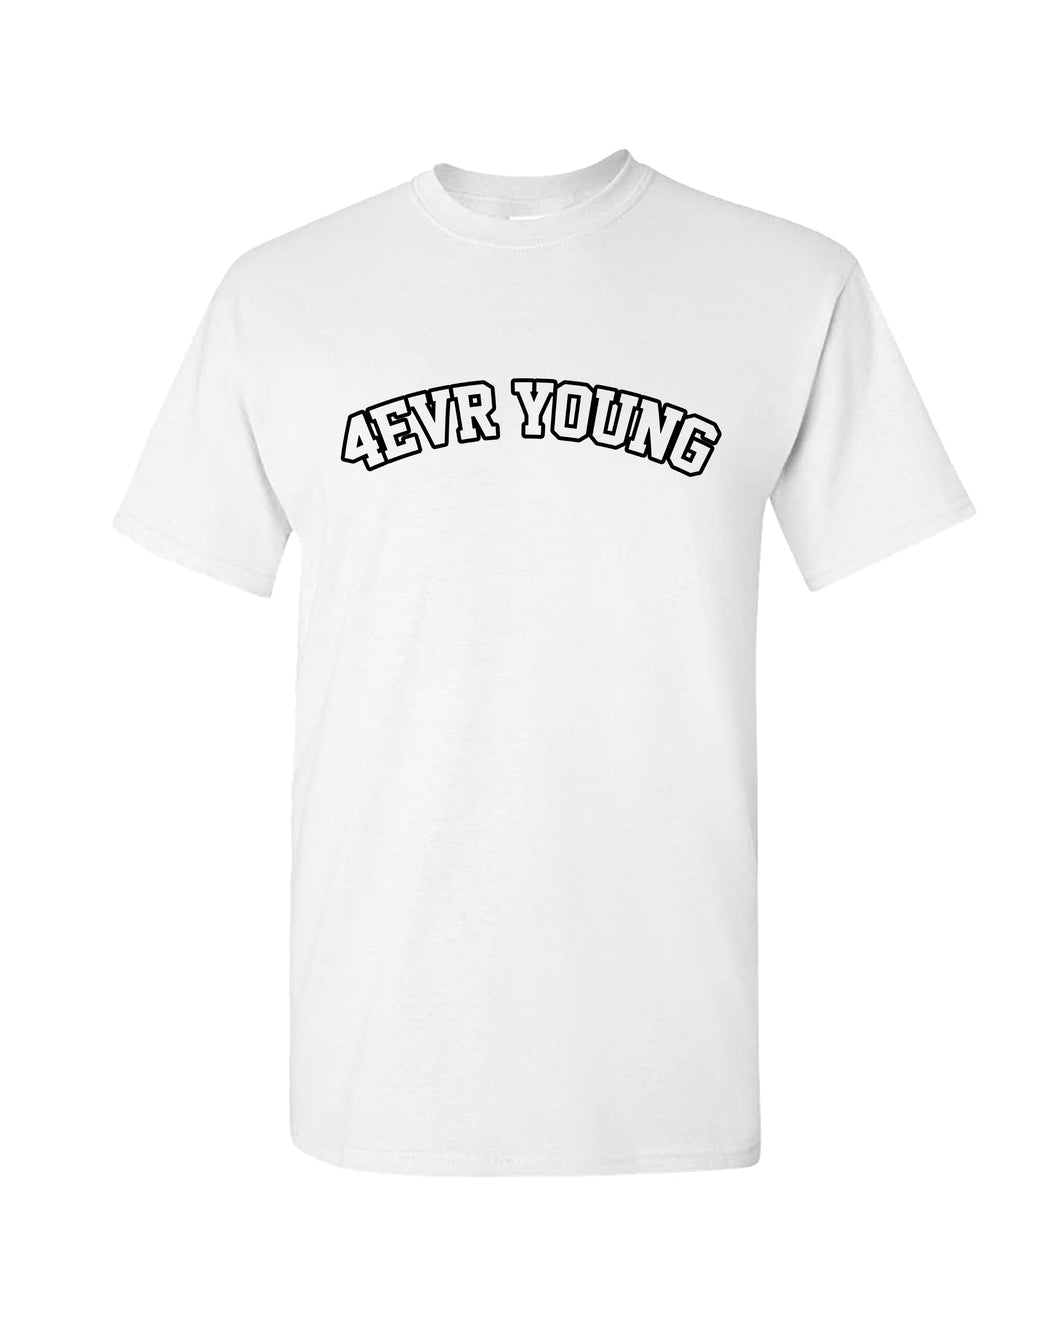 4EVR YOUNG University White Tee